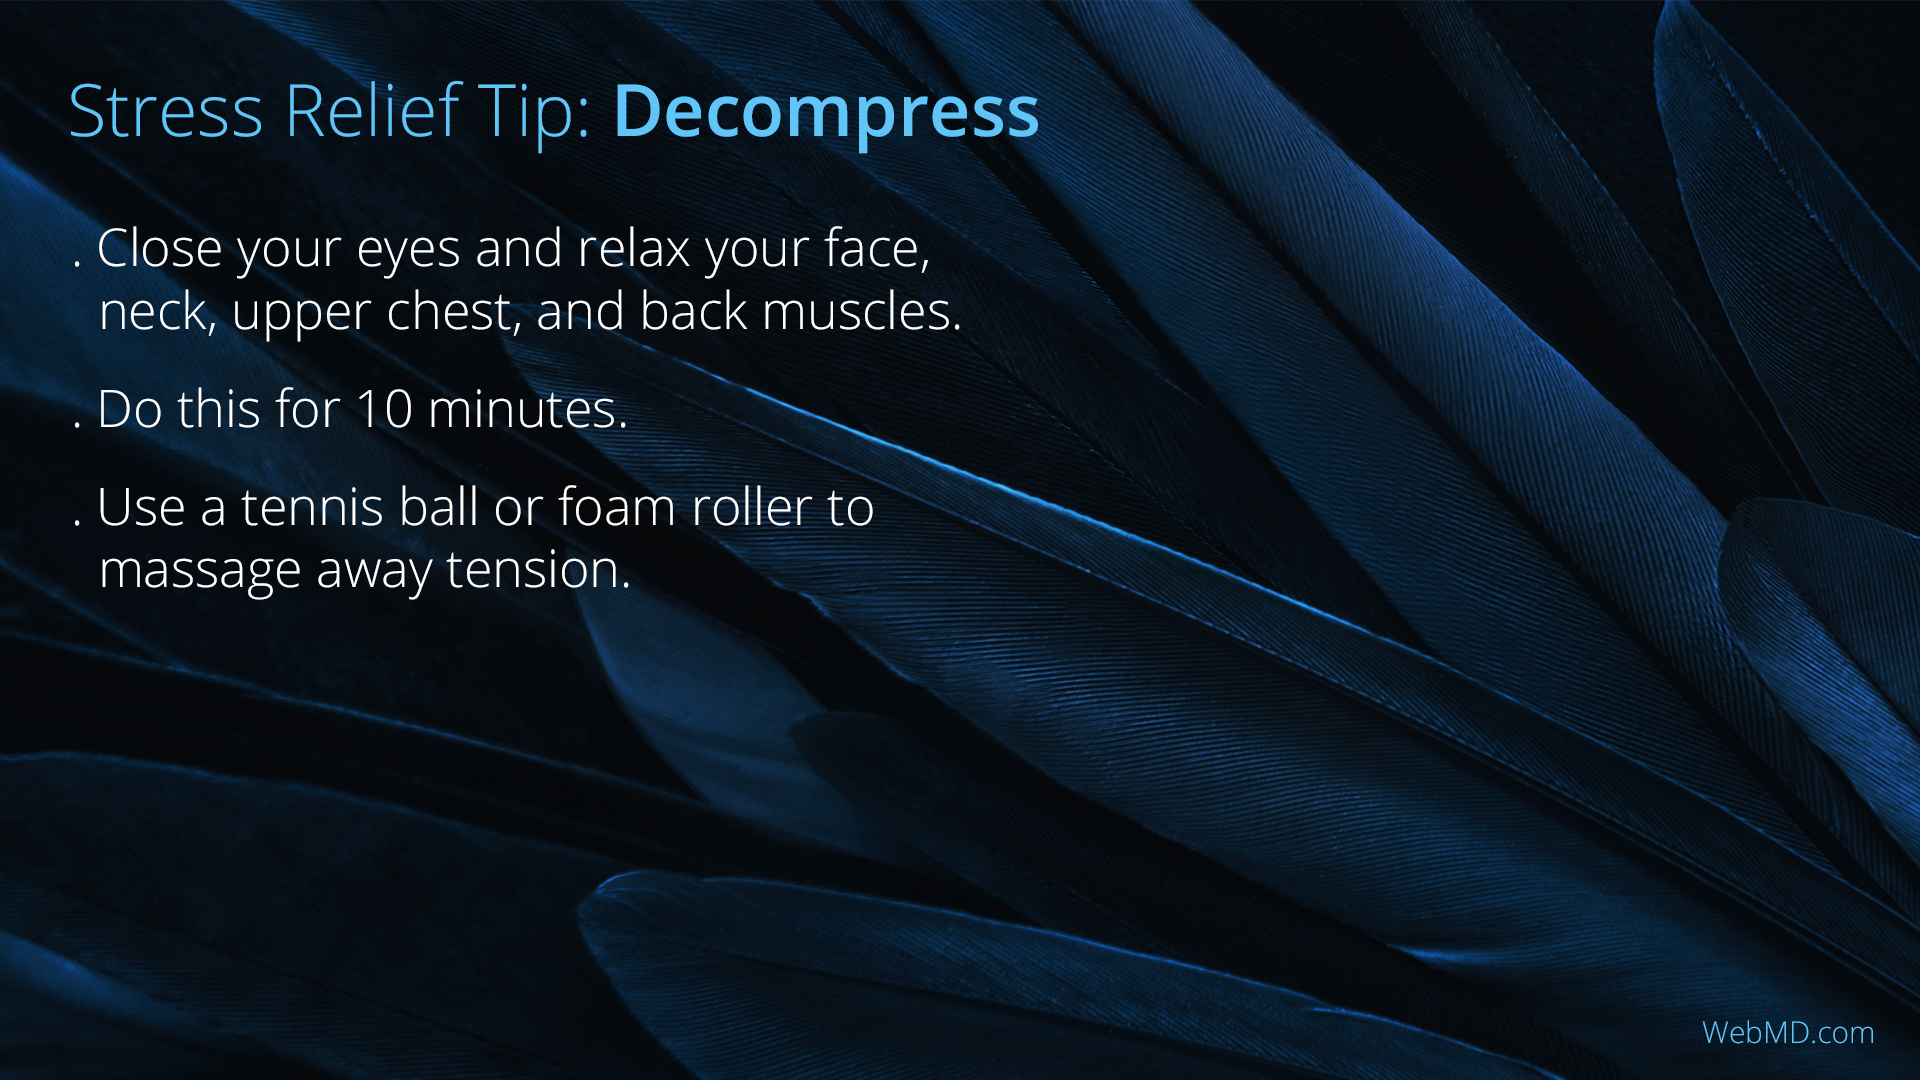 Free Graphic | Stress Relief Tips | Decompress